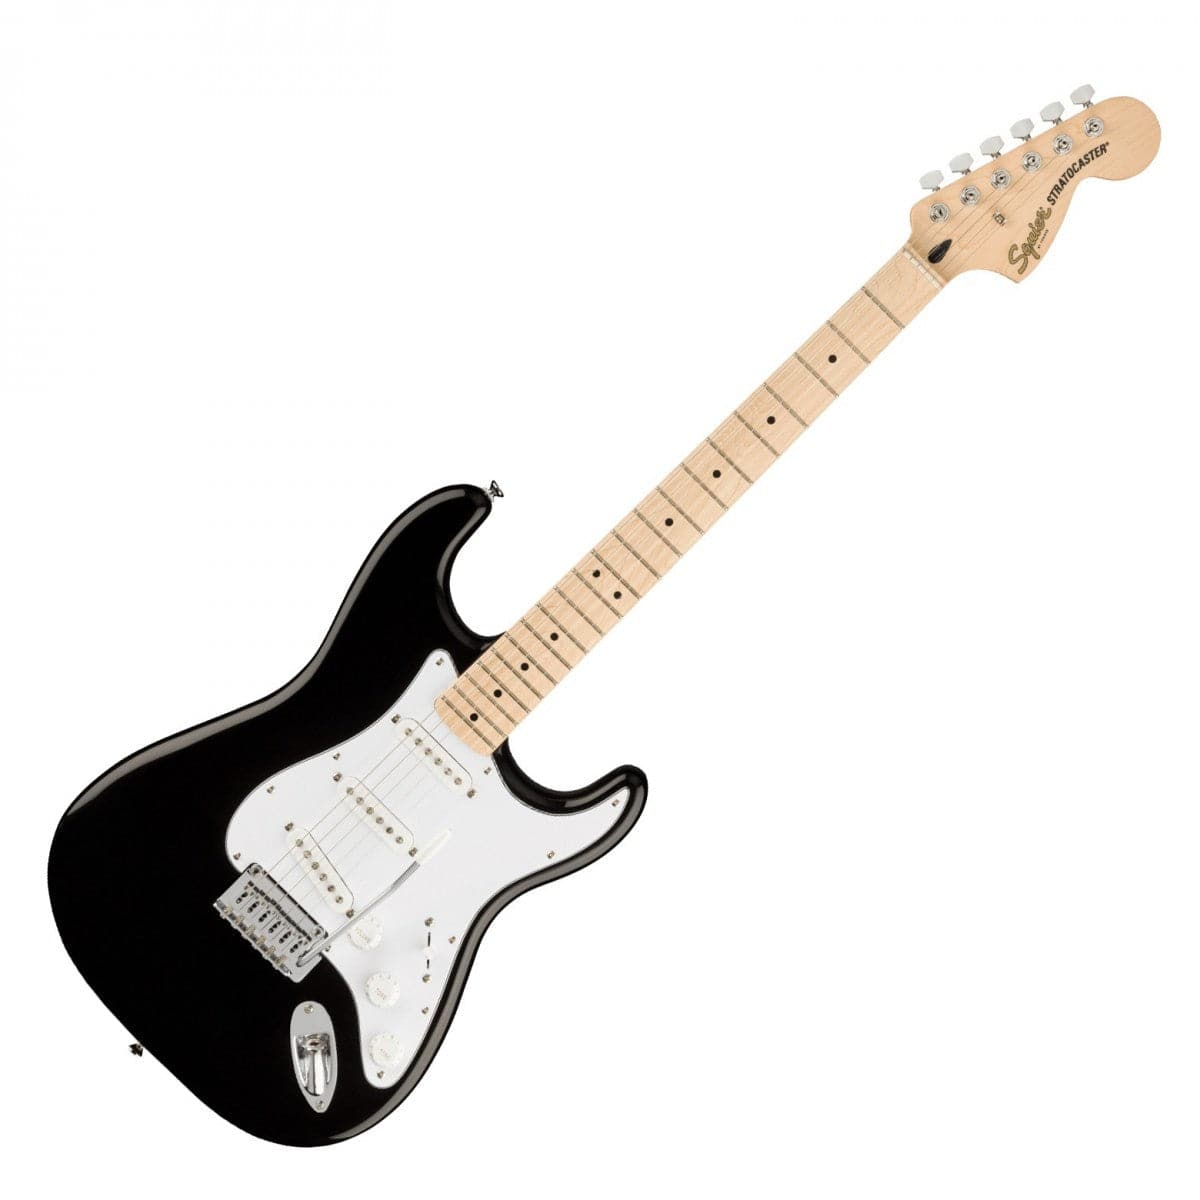 Squier Affinity Stratocaster Electric Guitar - Black - MN